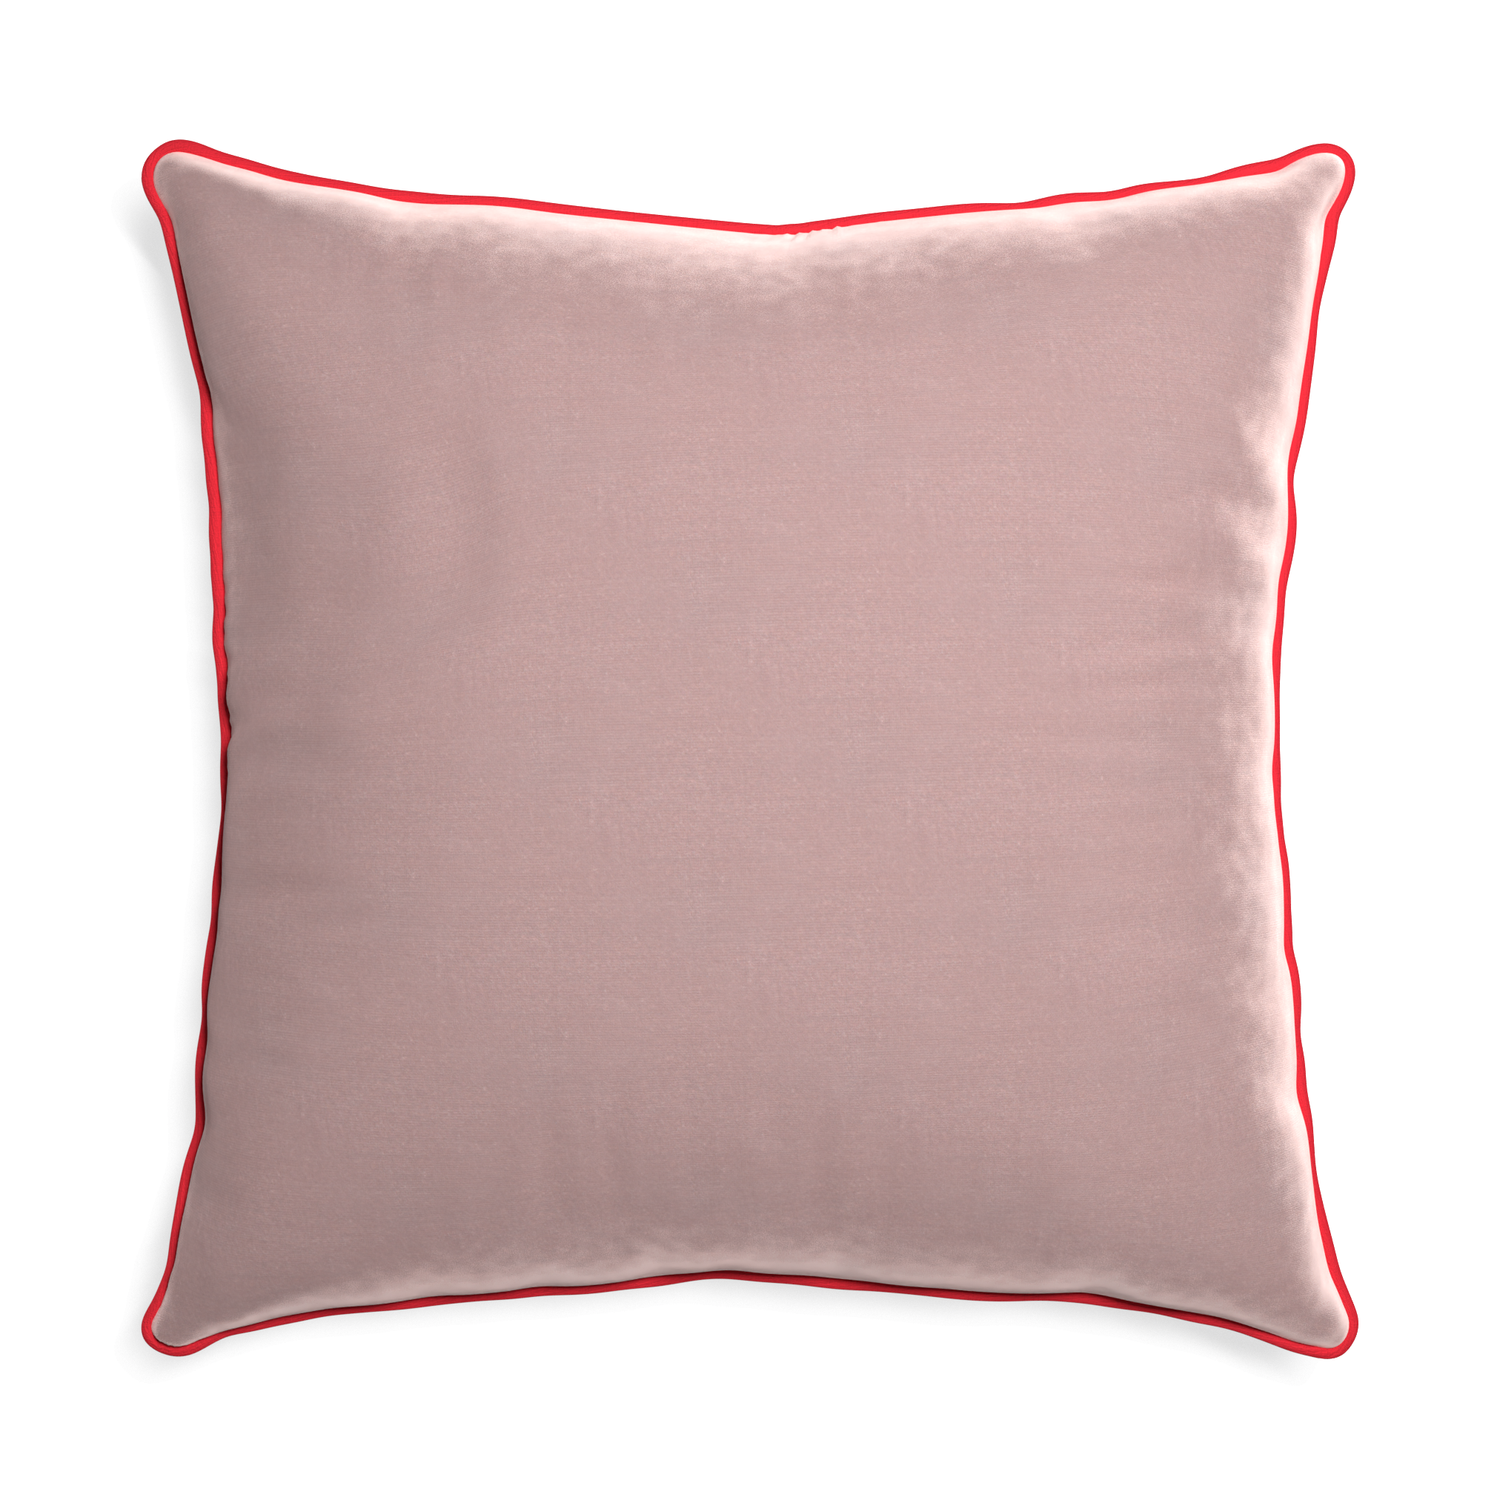 square mauve velvet pillow with red piping